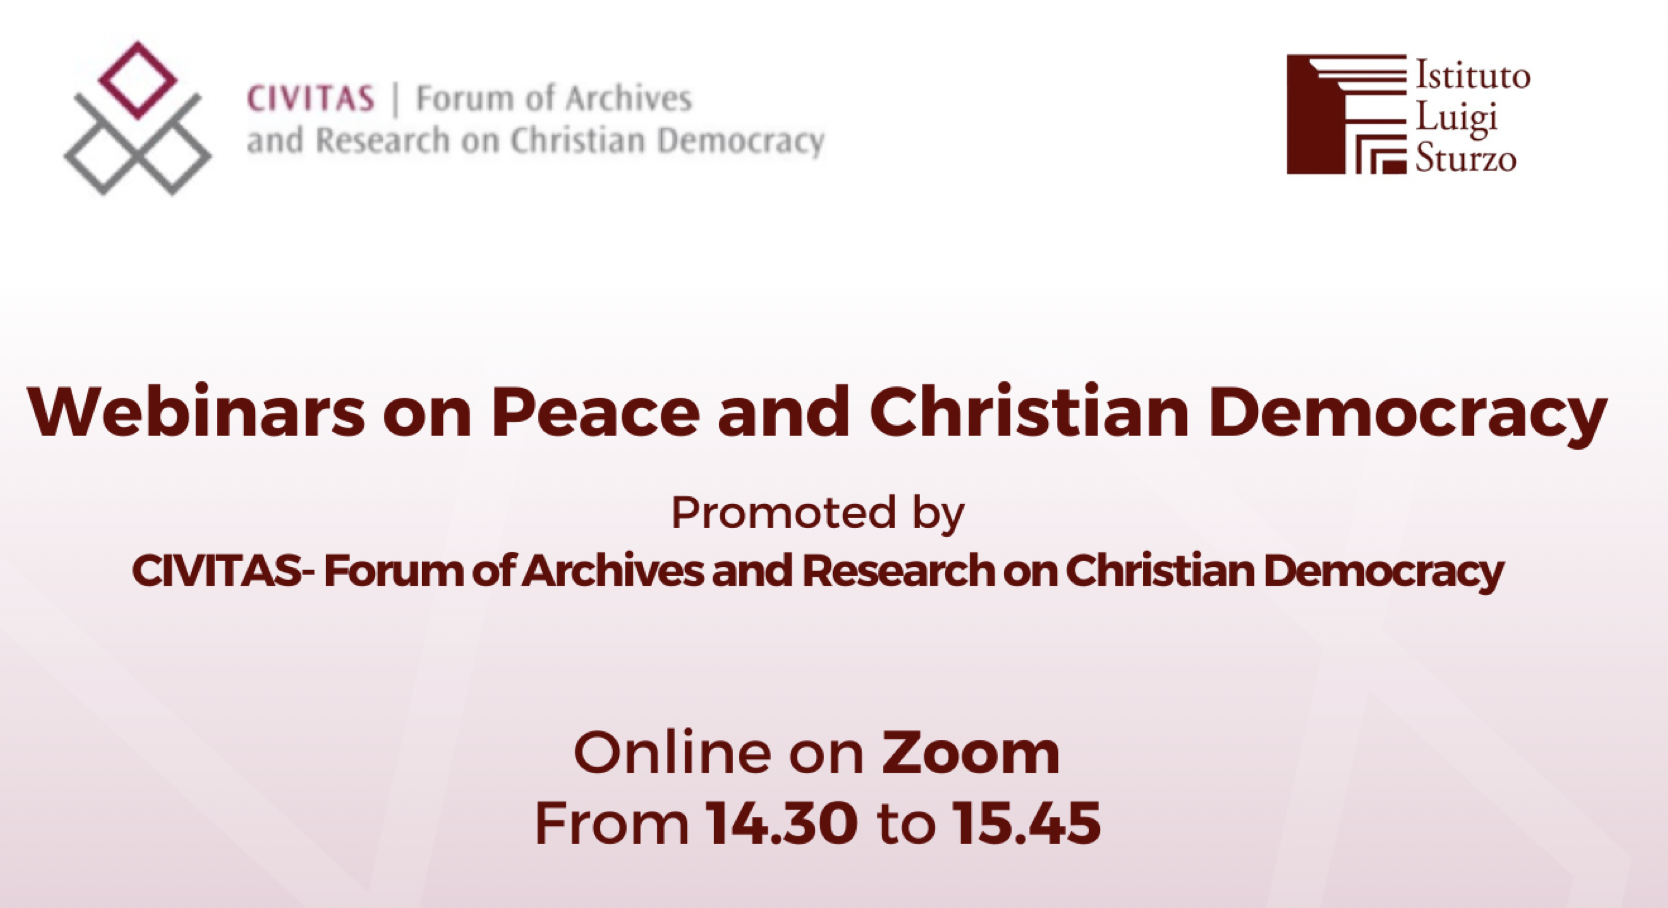 Peace and human rights: the influence of Christian Democratic Thought in the ‘lndivisibility of Peace11 thesis of Charter 77